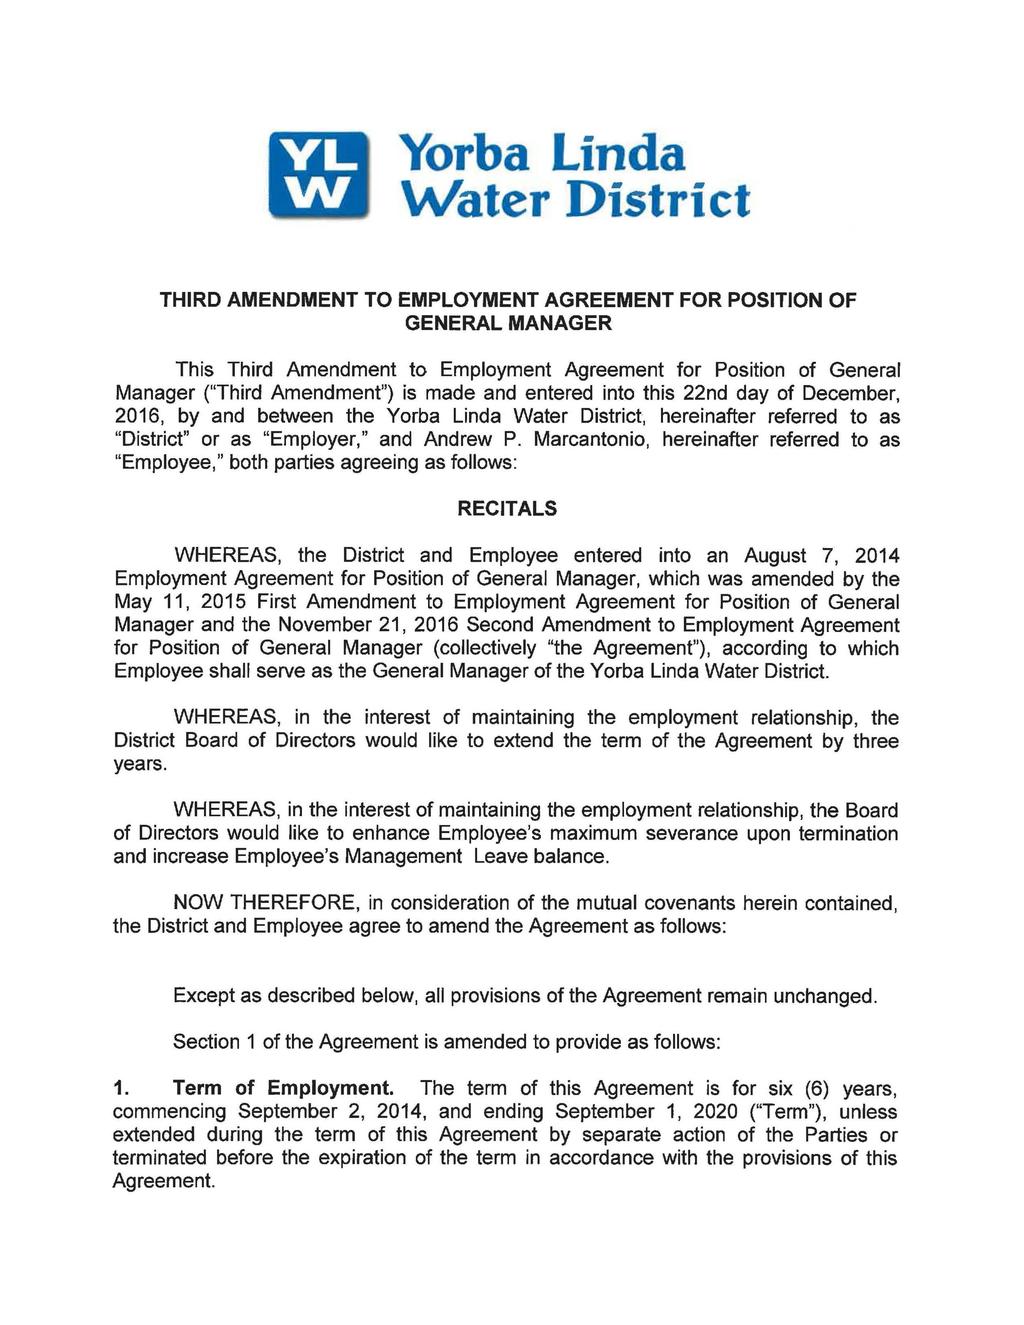 Yorba Linda Water District THIRD AMENDMENT TO EMPLOYMENT AGREEMENT FOR POSITION OF GENERAL MANAGER This Third Amendment to Employment Agreement for Position of General Manager ("Third Amendment") is